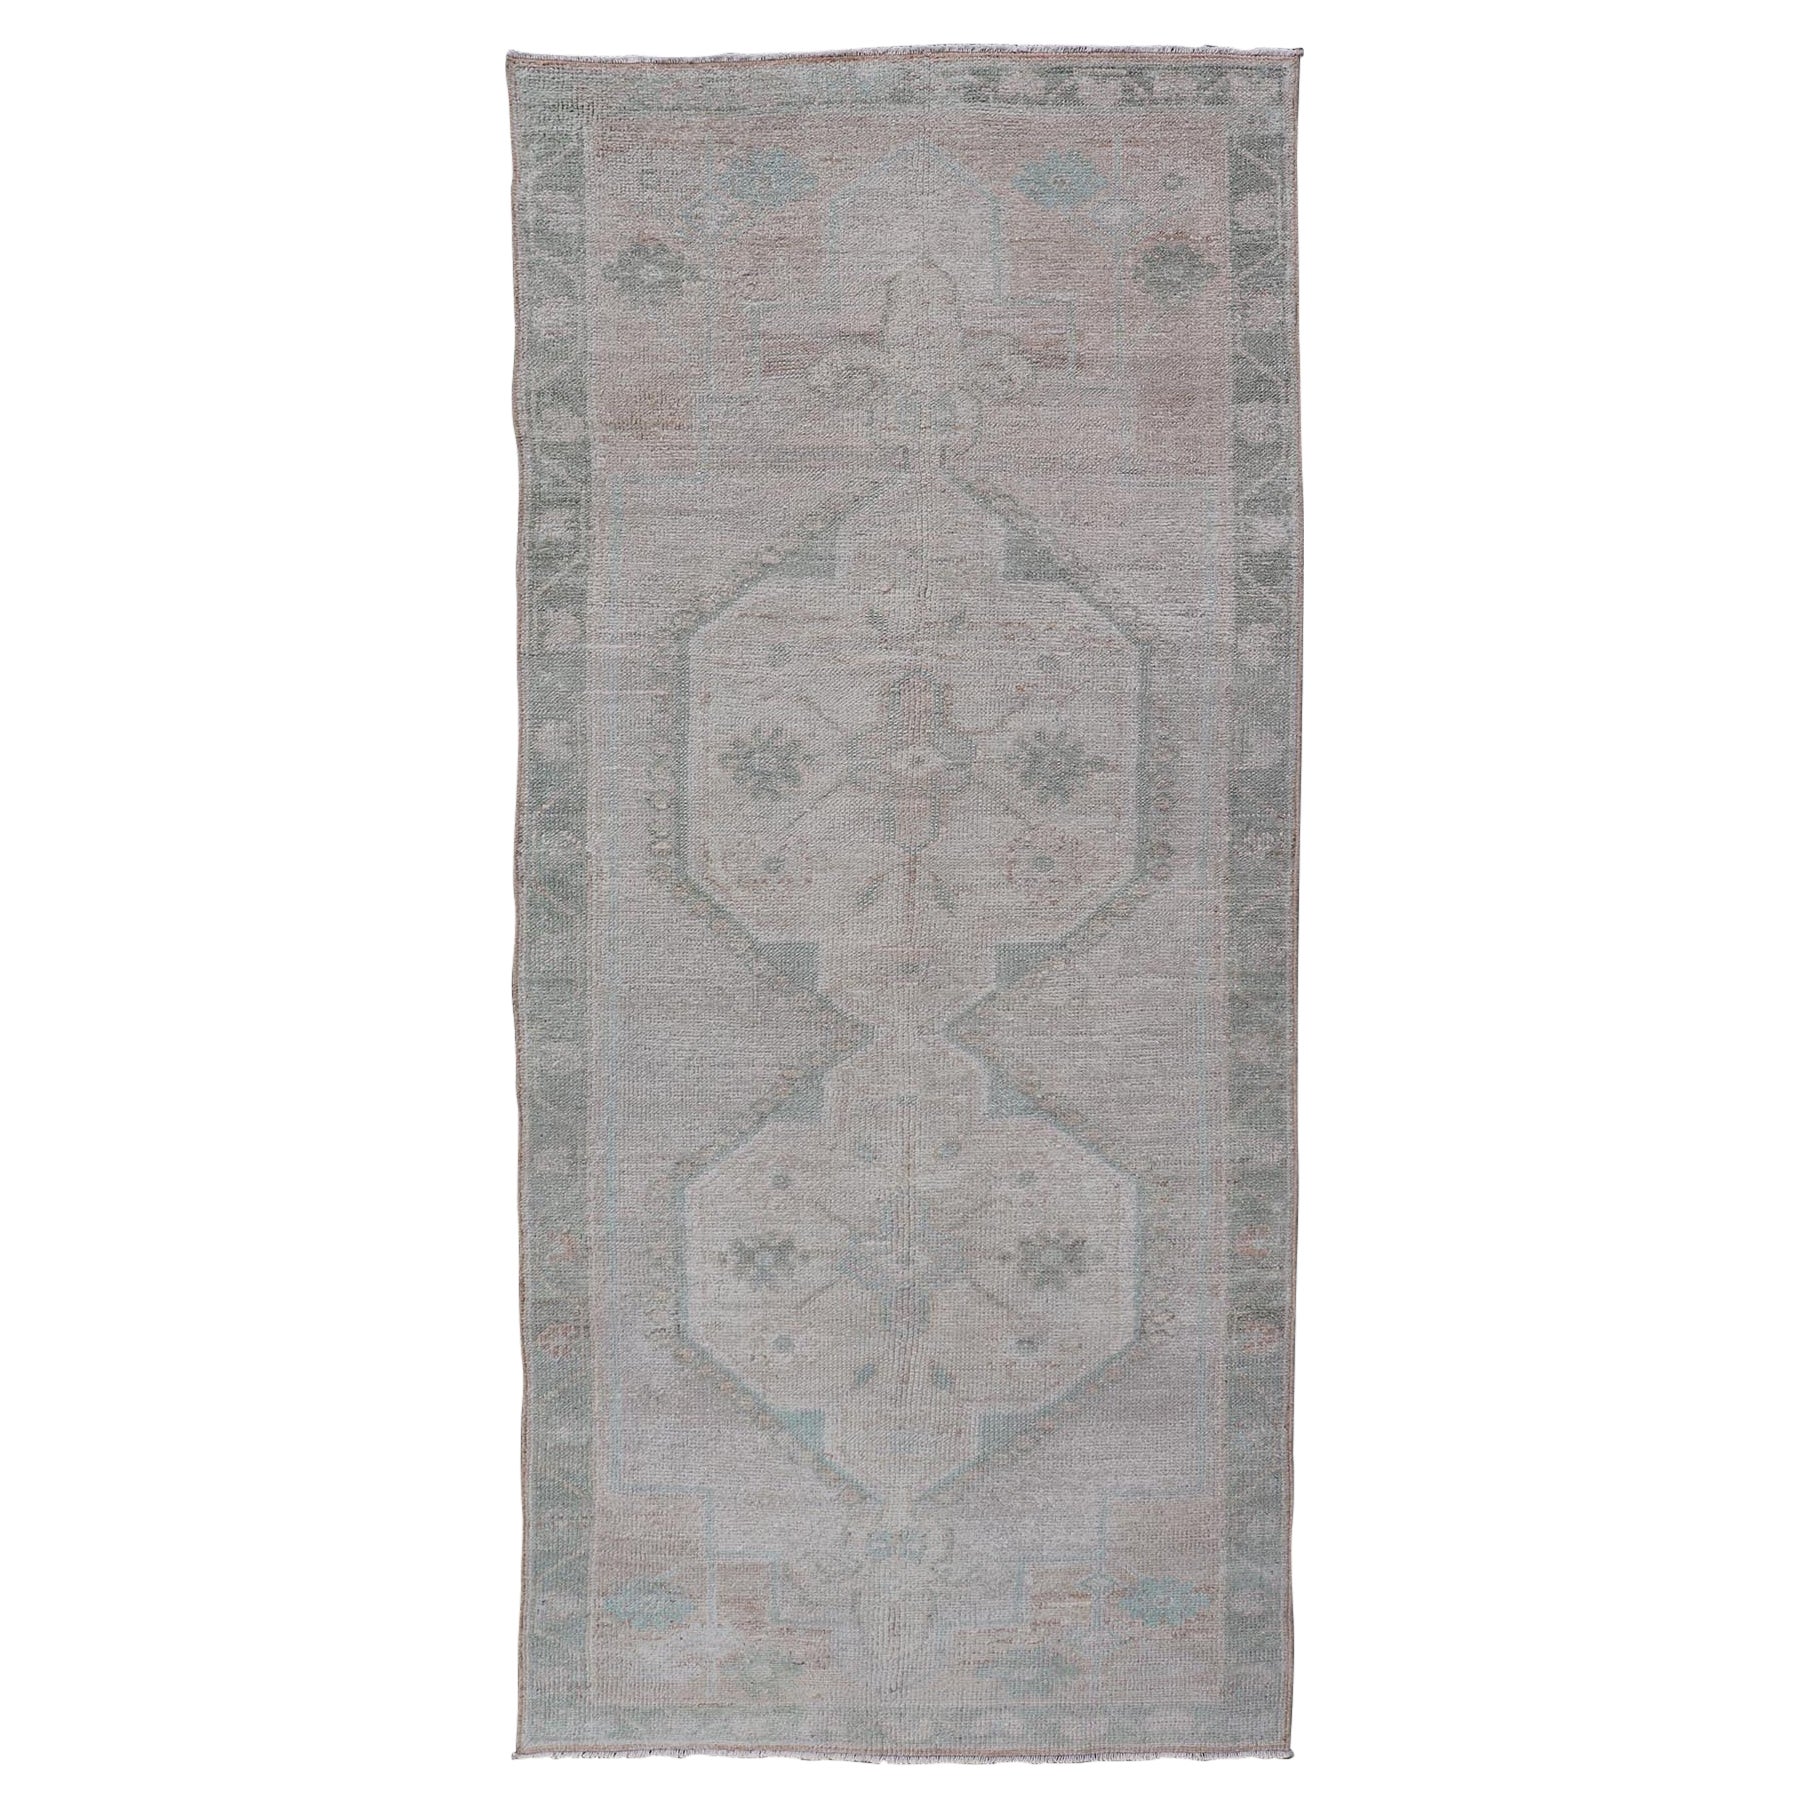 Vintage Turkish Oushak Runner with Subdued Geometric Medallions in Light Tones